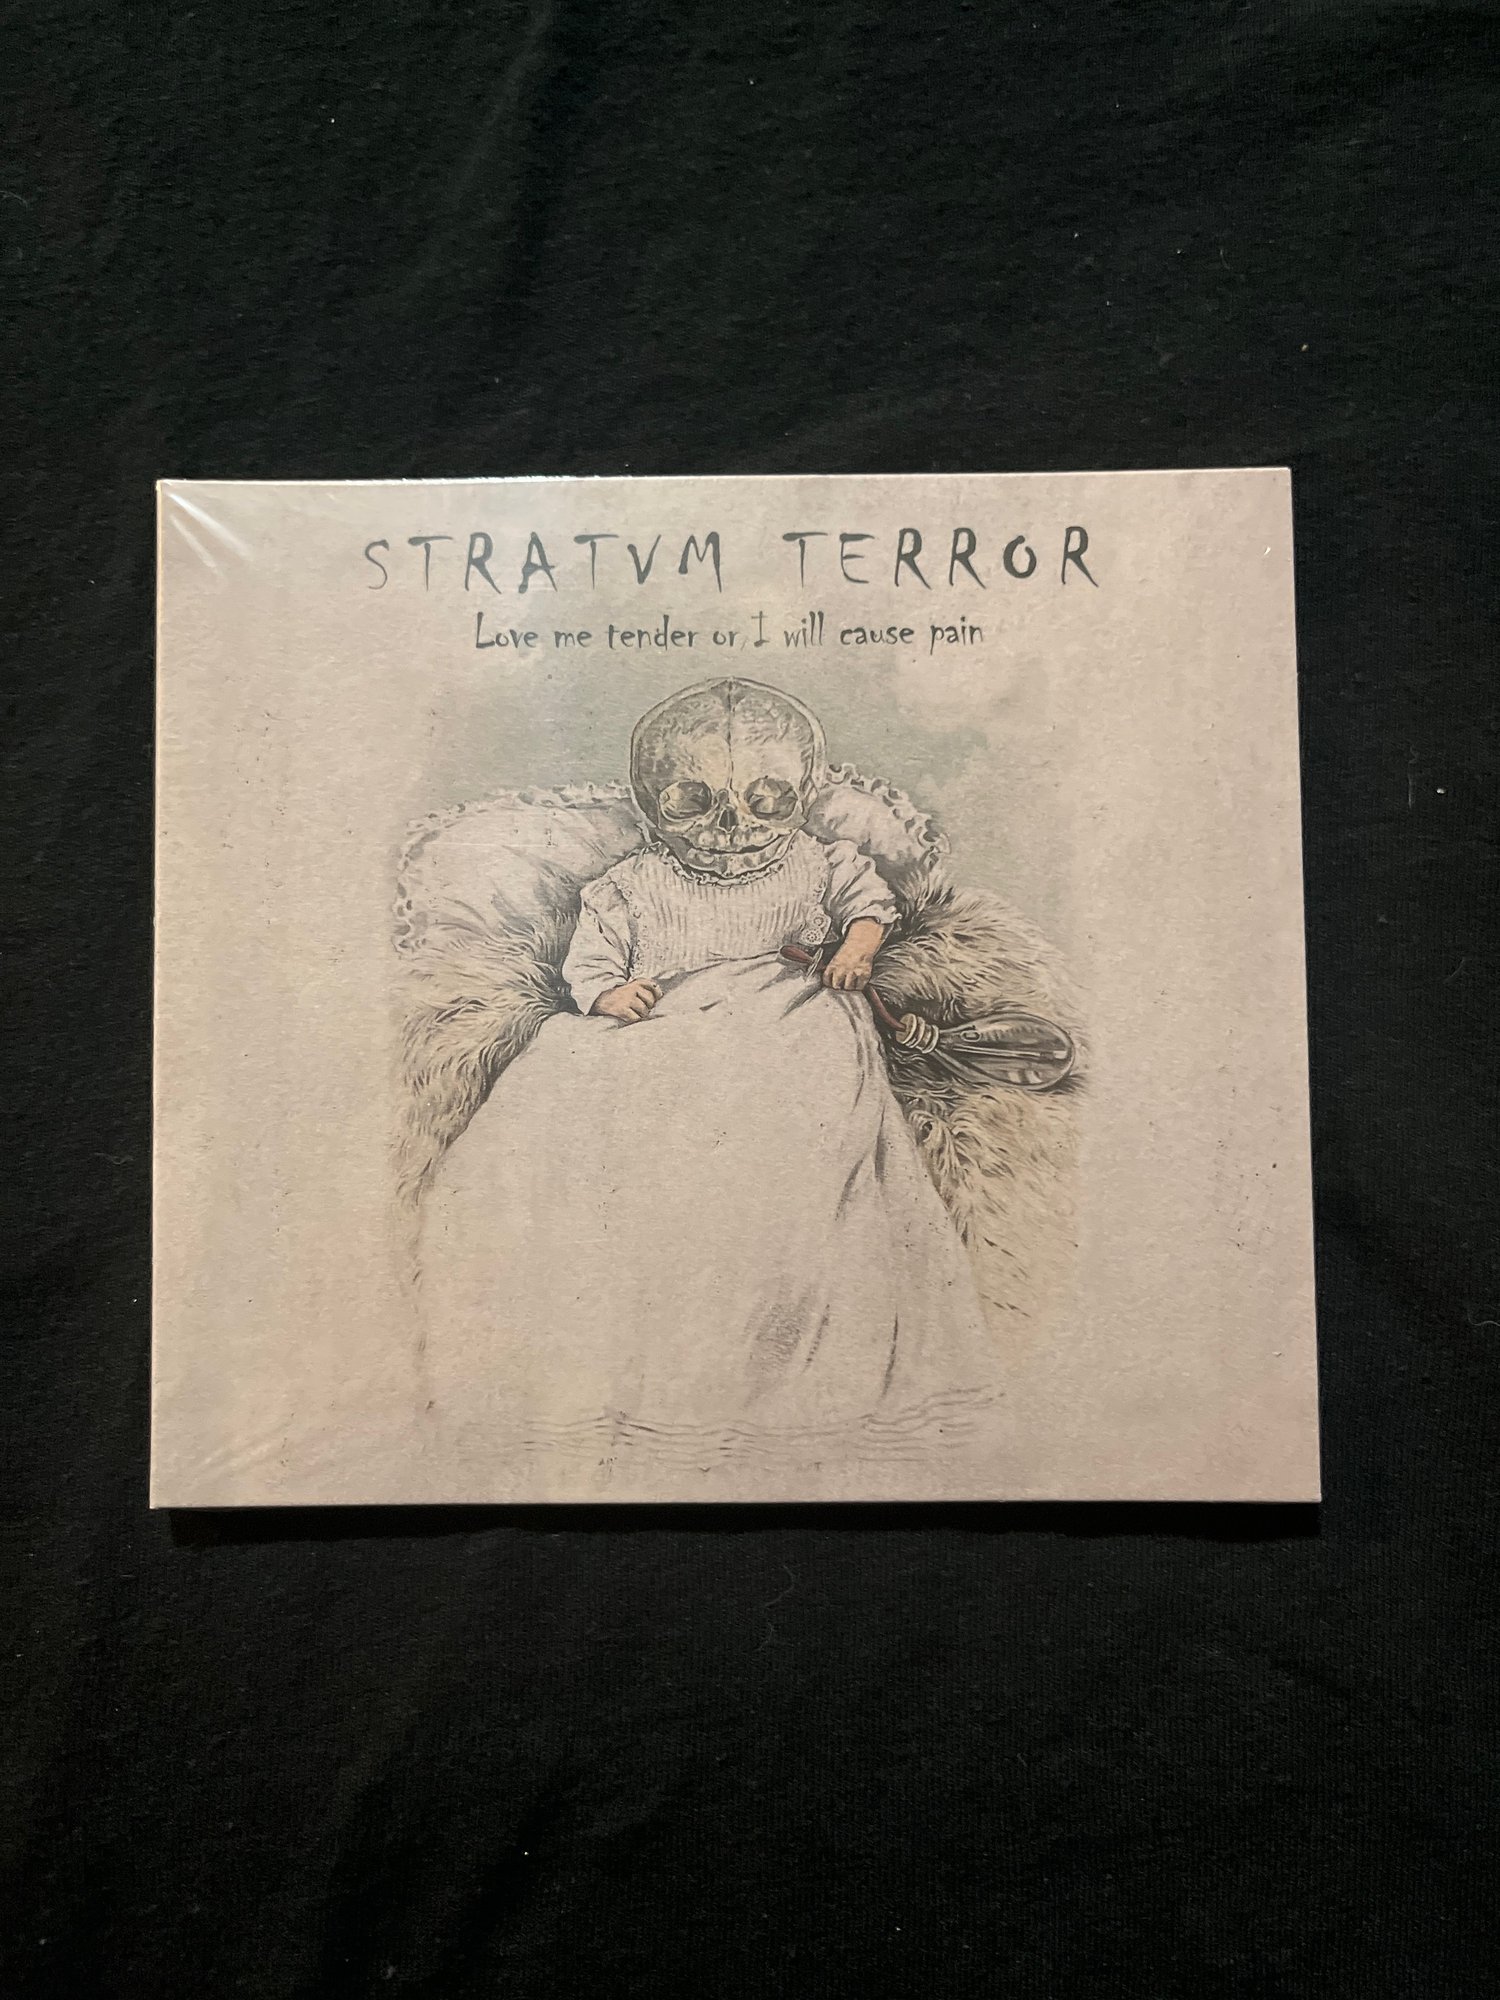 Stratvm Terror - Love Me Tender Or I Will Cause Pain CD (OEC)